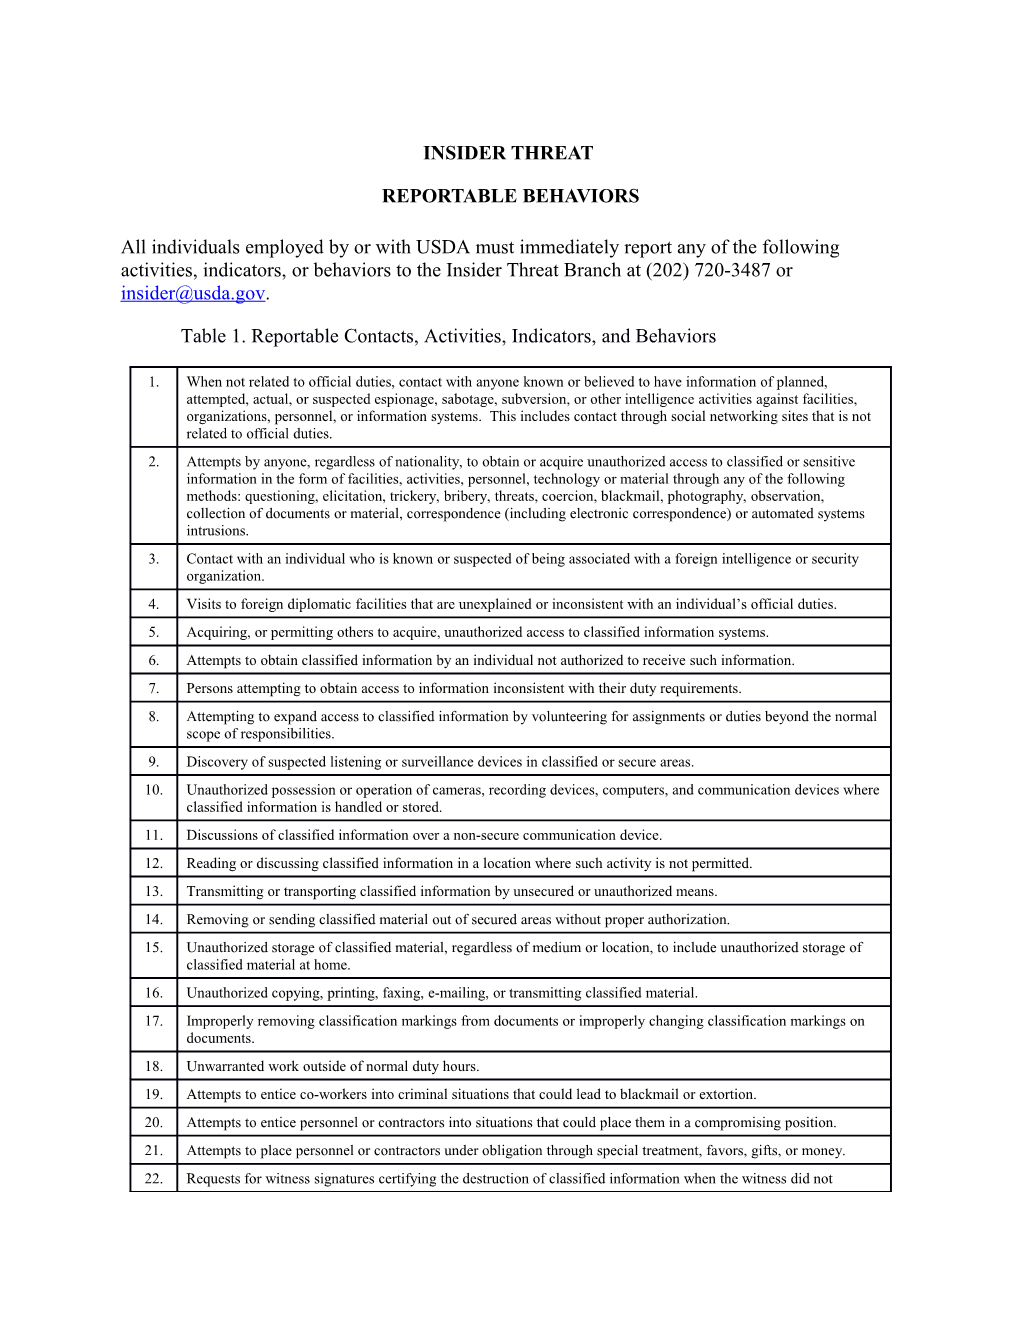 Table 1. Reportable Contacts, Activities, Indicators, and Behaviors s1